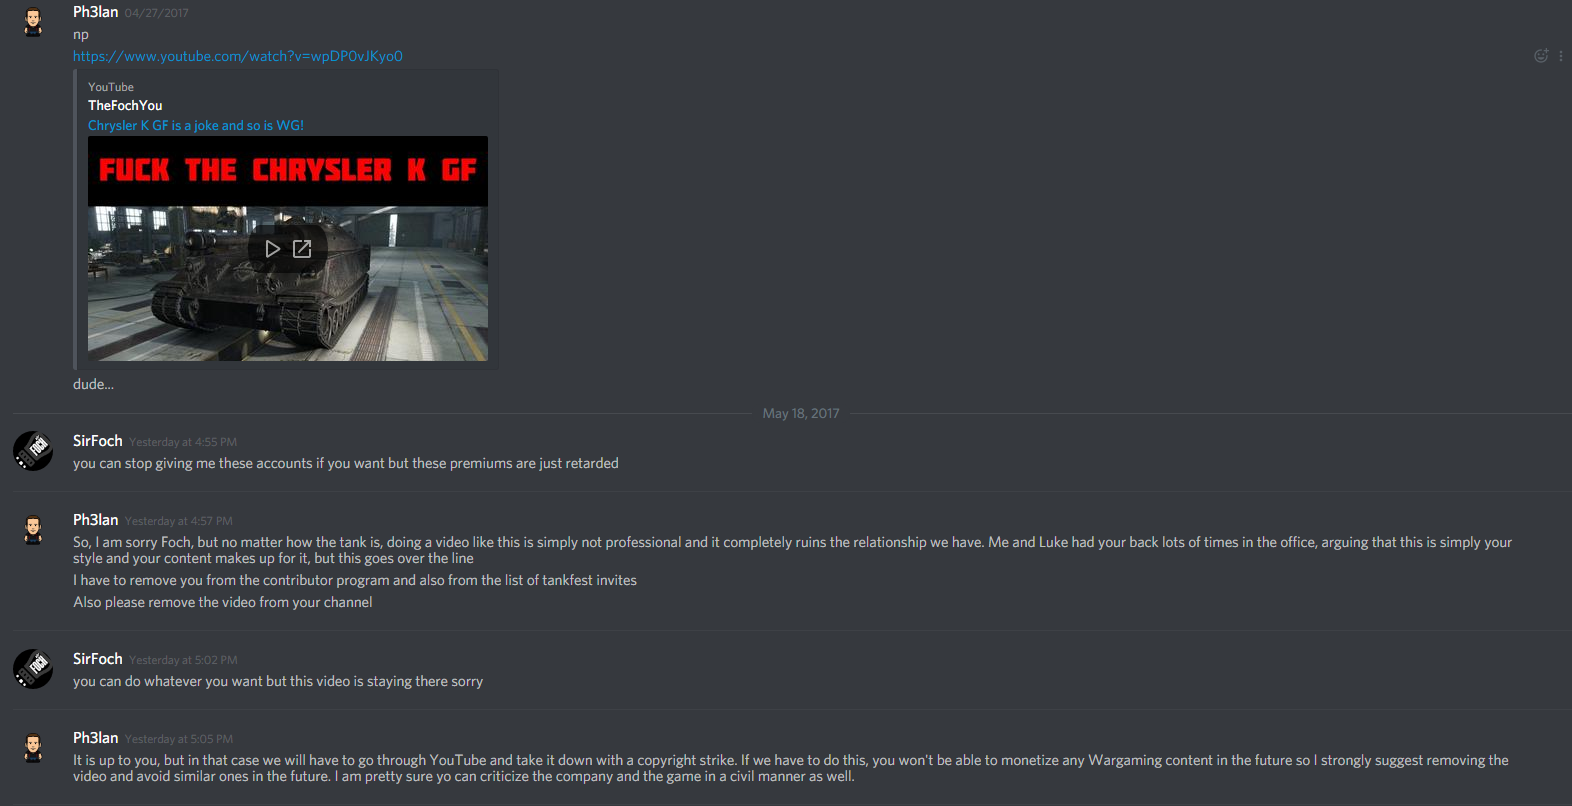 Wargaming Rep Threatens Copyright Strike In These Discord Messages #1